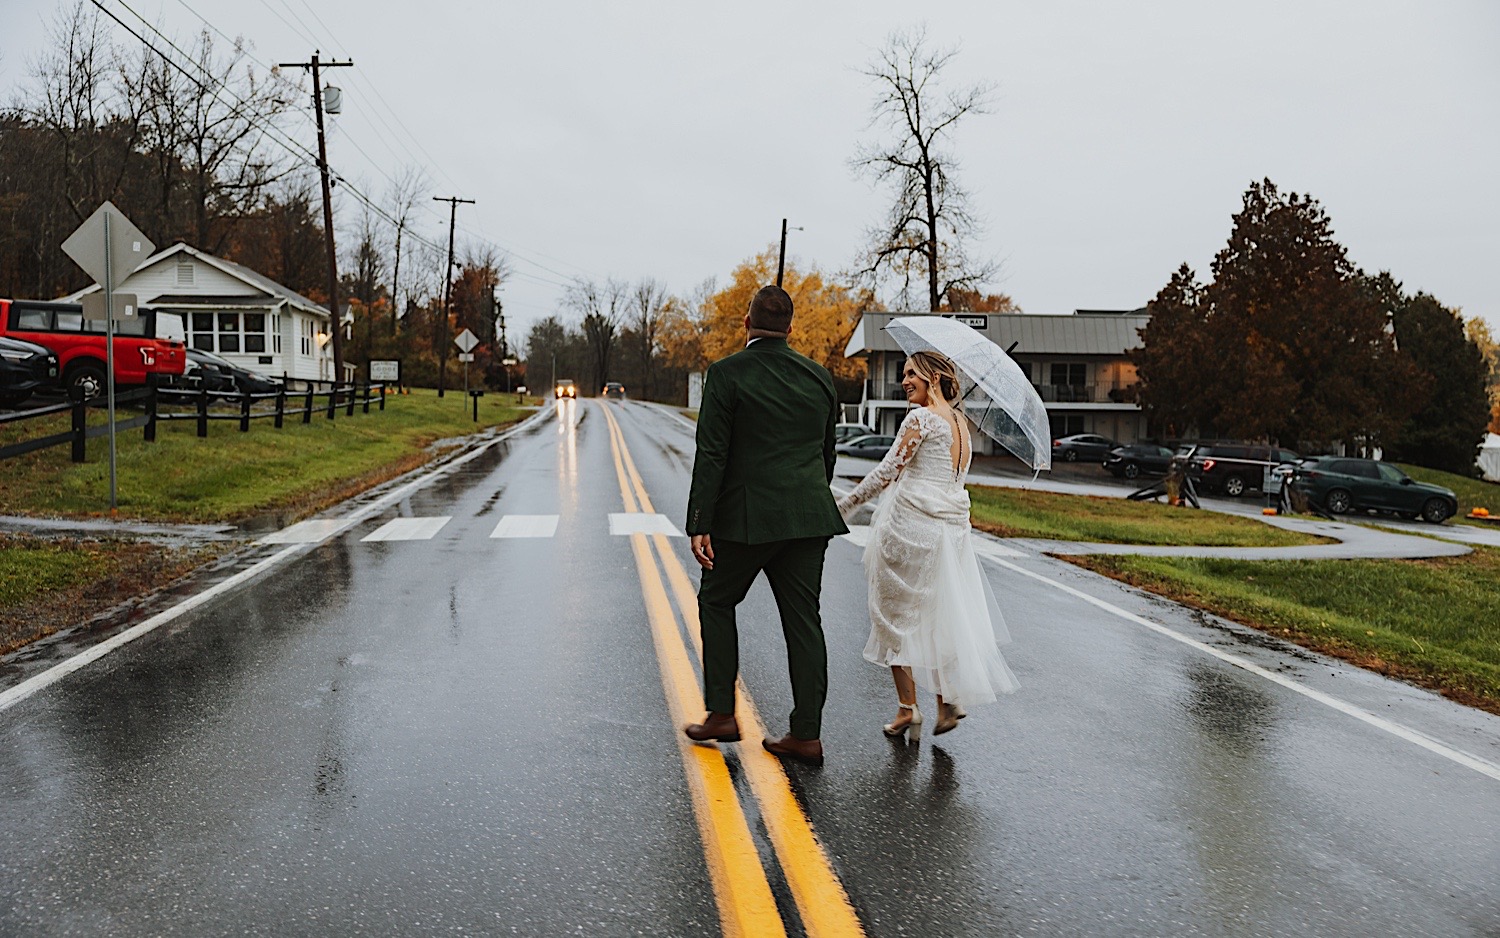 A bride and groom hold hands while crossing a street on a rainy day to get to their wedding venue, Lake Bomoseen Lodge in Vermont